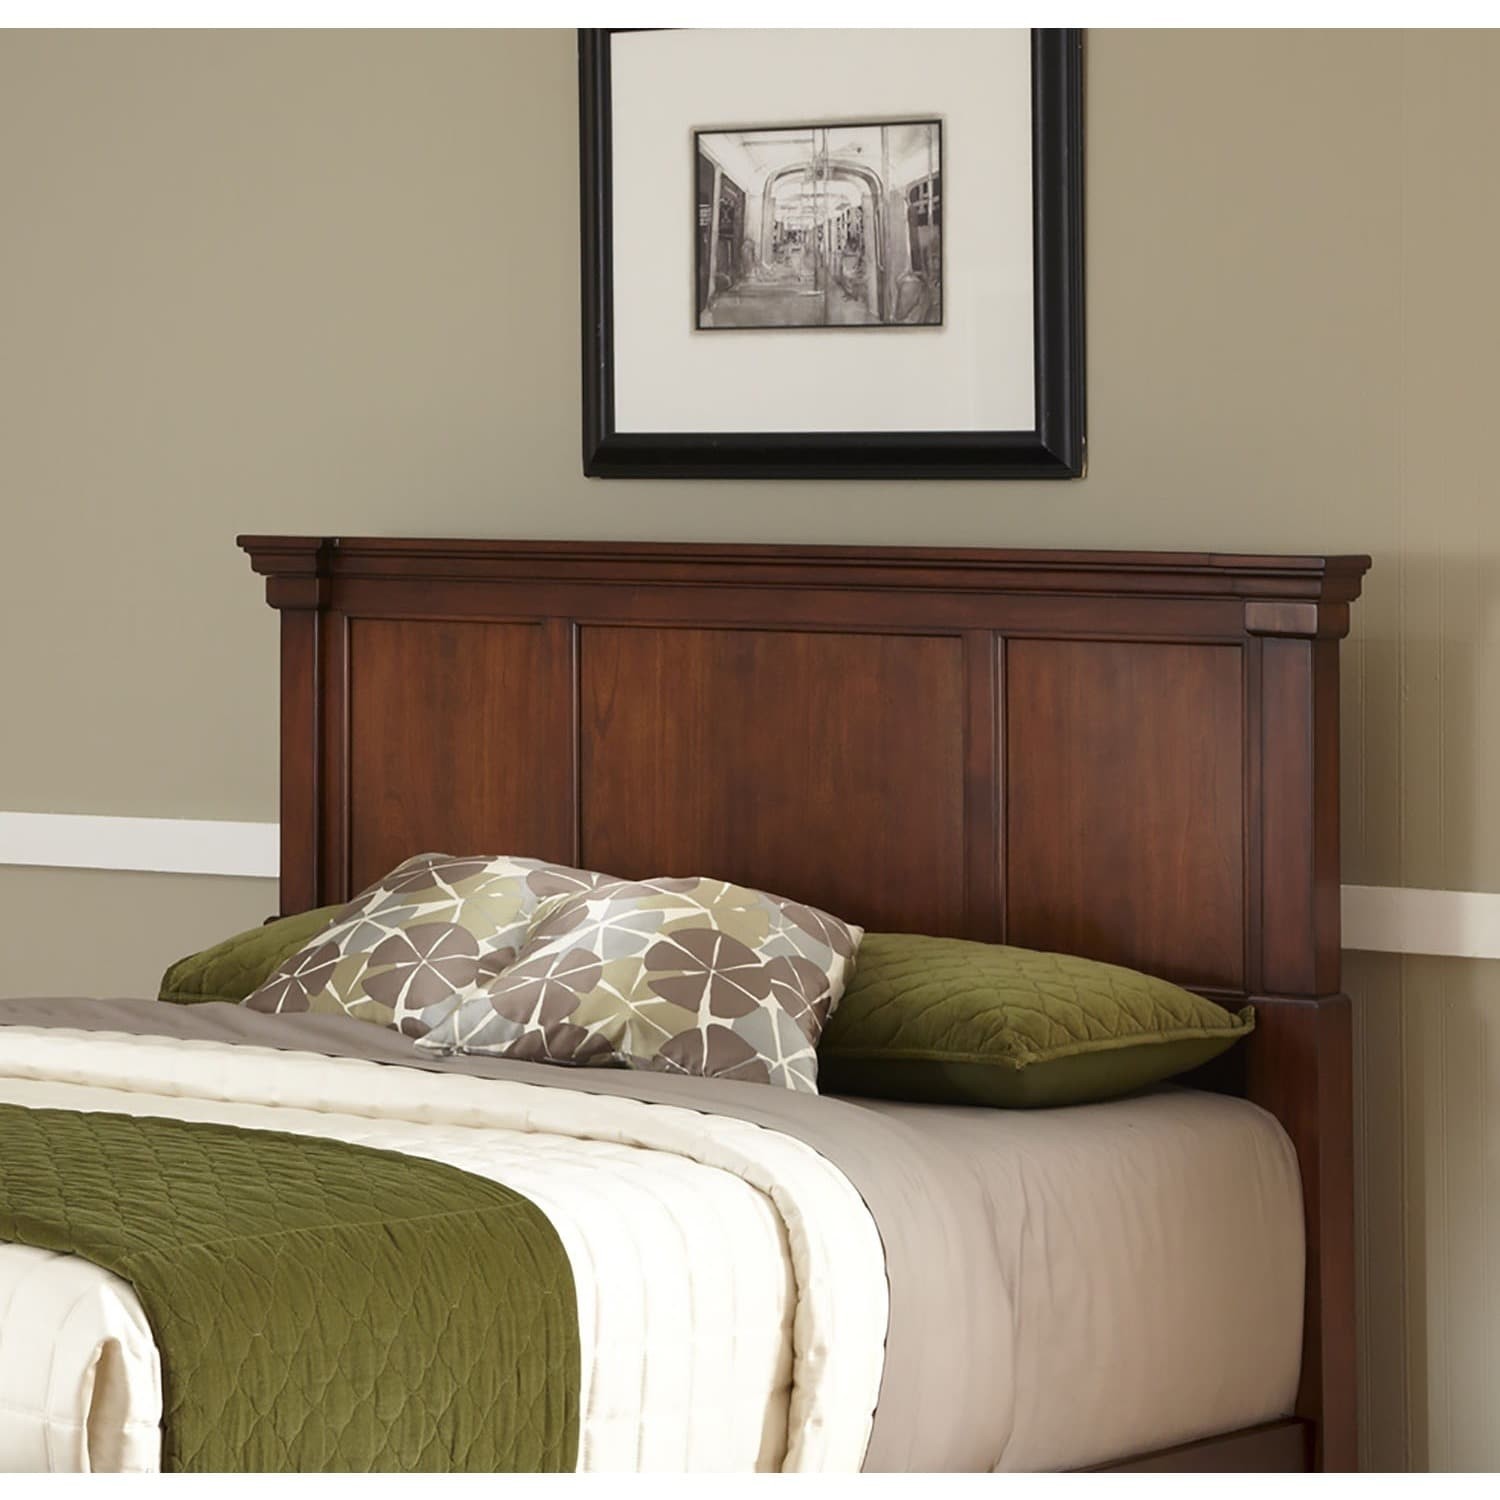 Wood Headboards For King Size Beds